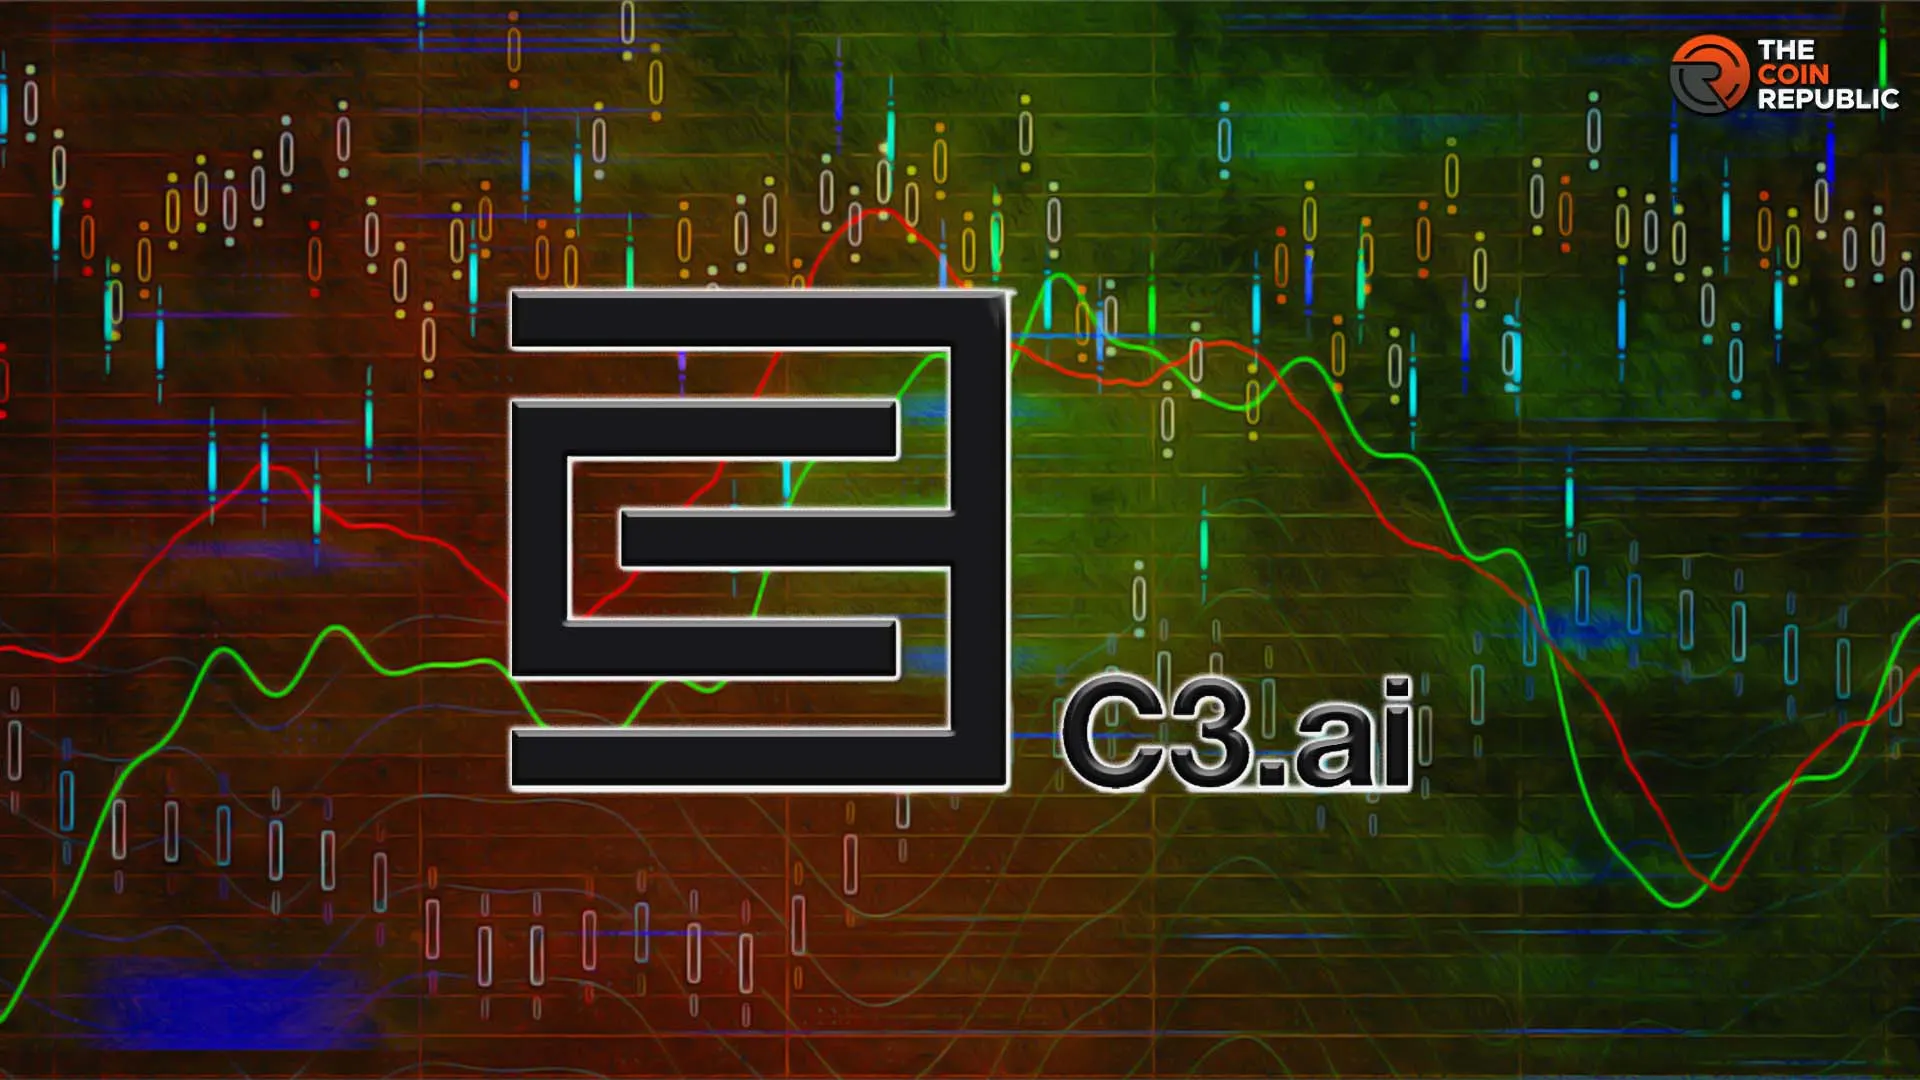 C3.ai Stock Forecast 2025: What are the Expert's Predictions? – Kanaries